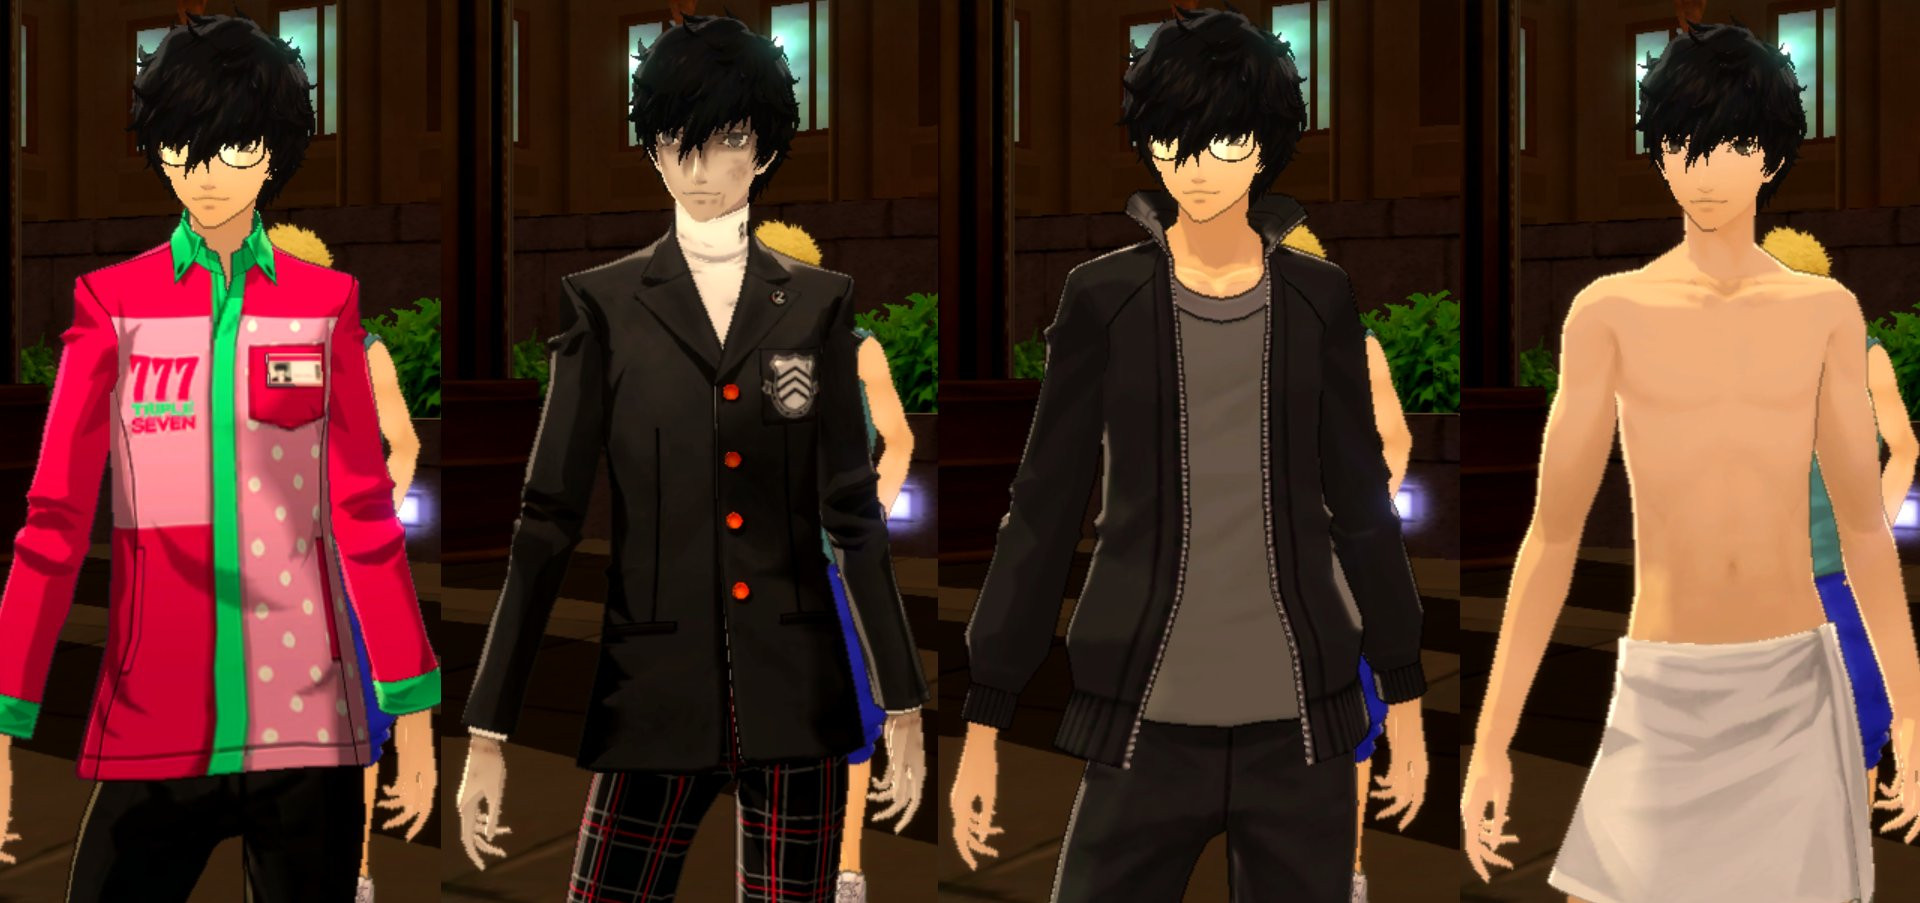 Persona 3 Outfits Mod  Persona 5 Royal 